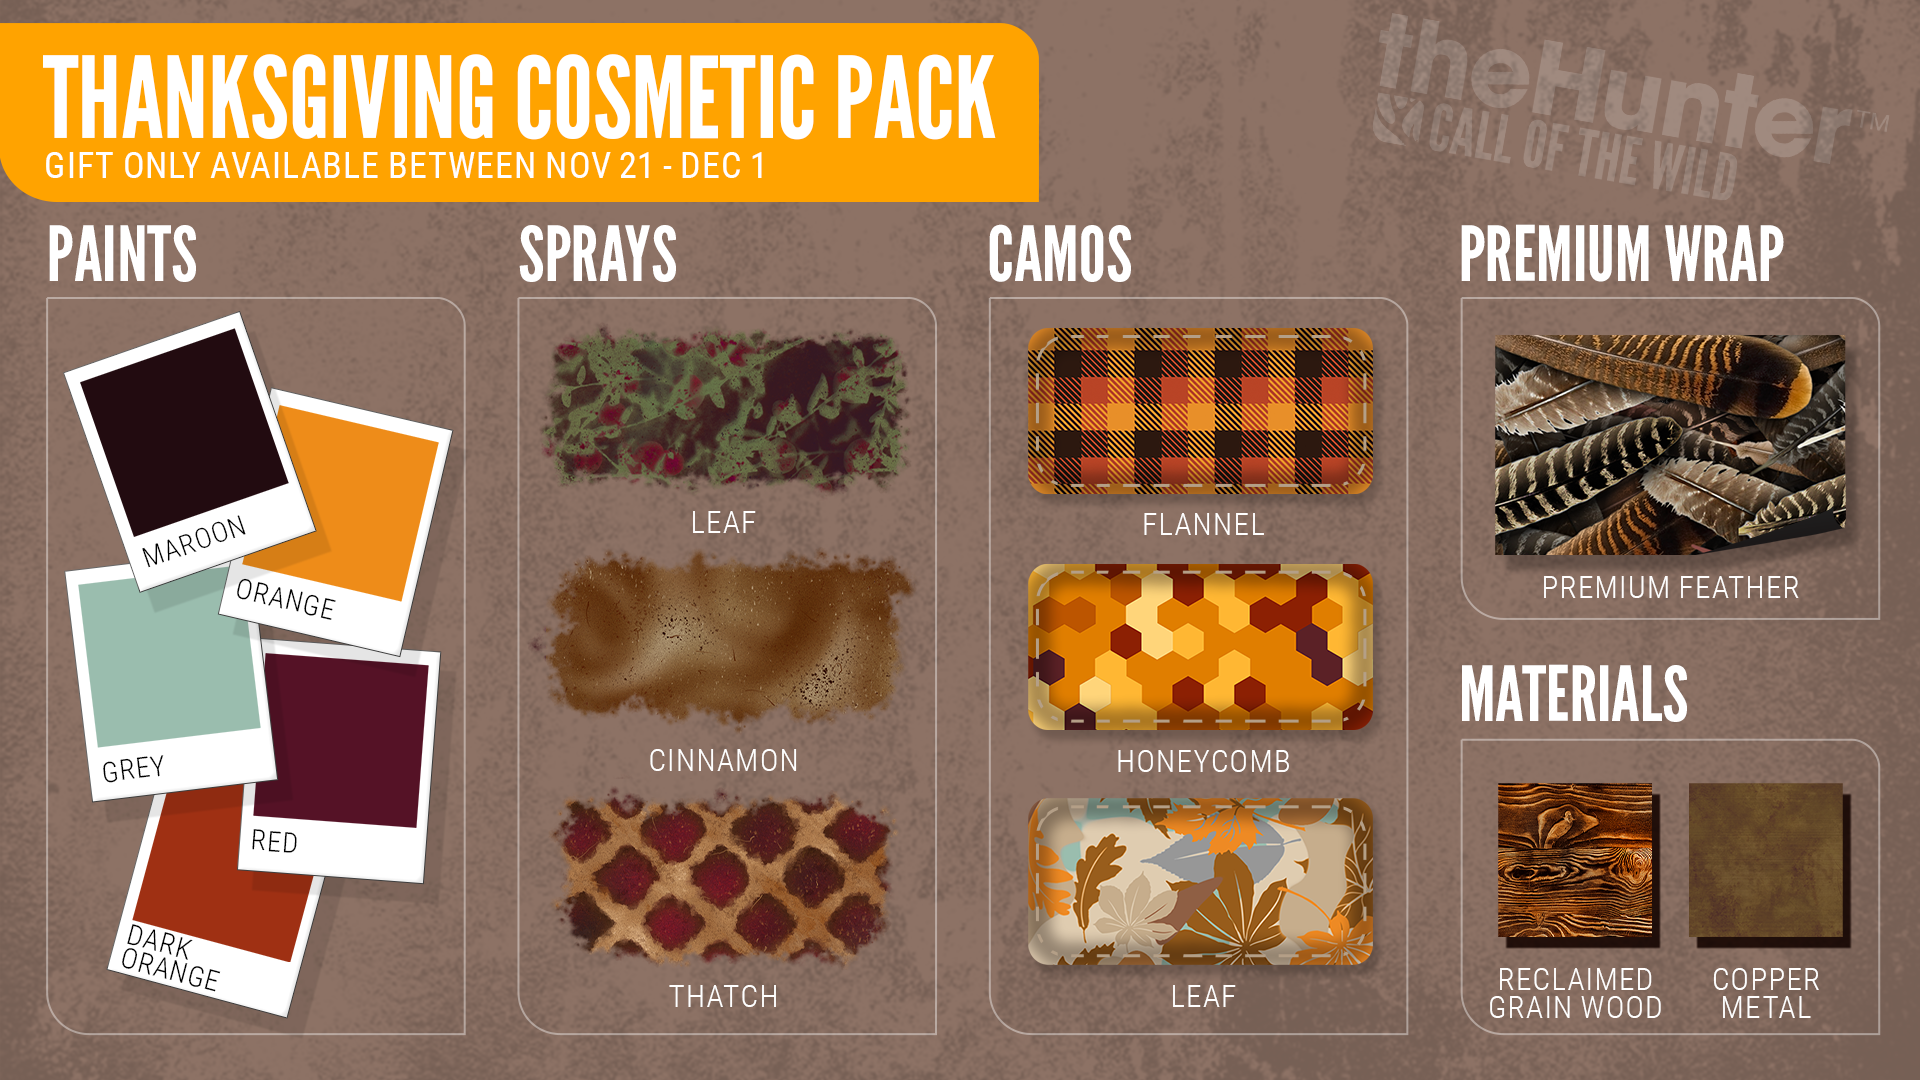 Limited-time Thanksgiving Cosmetic Pack contents 2023.